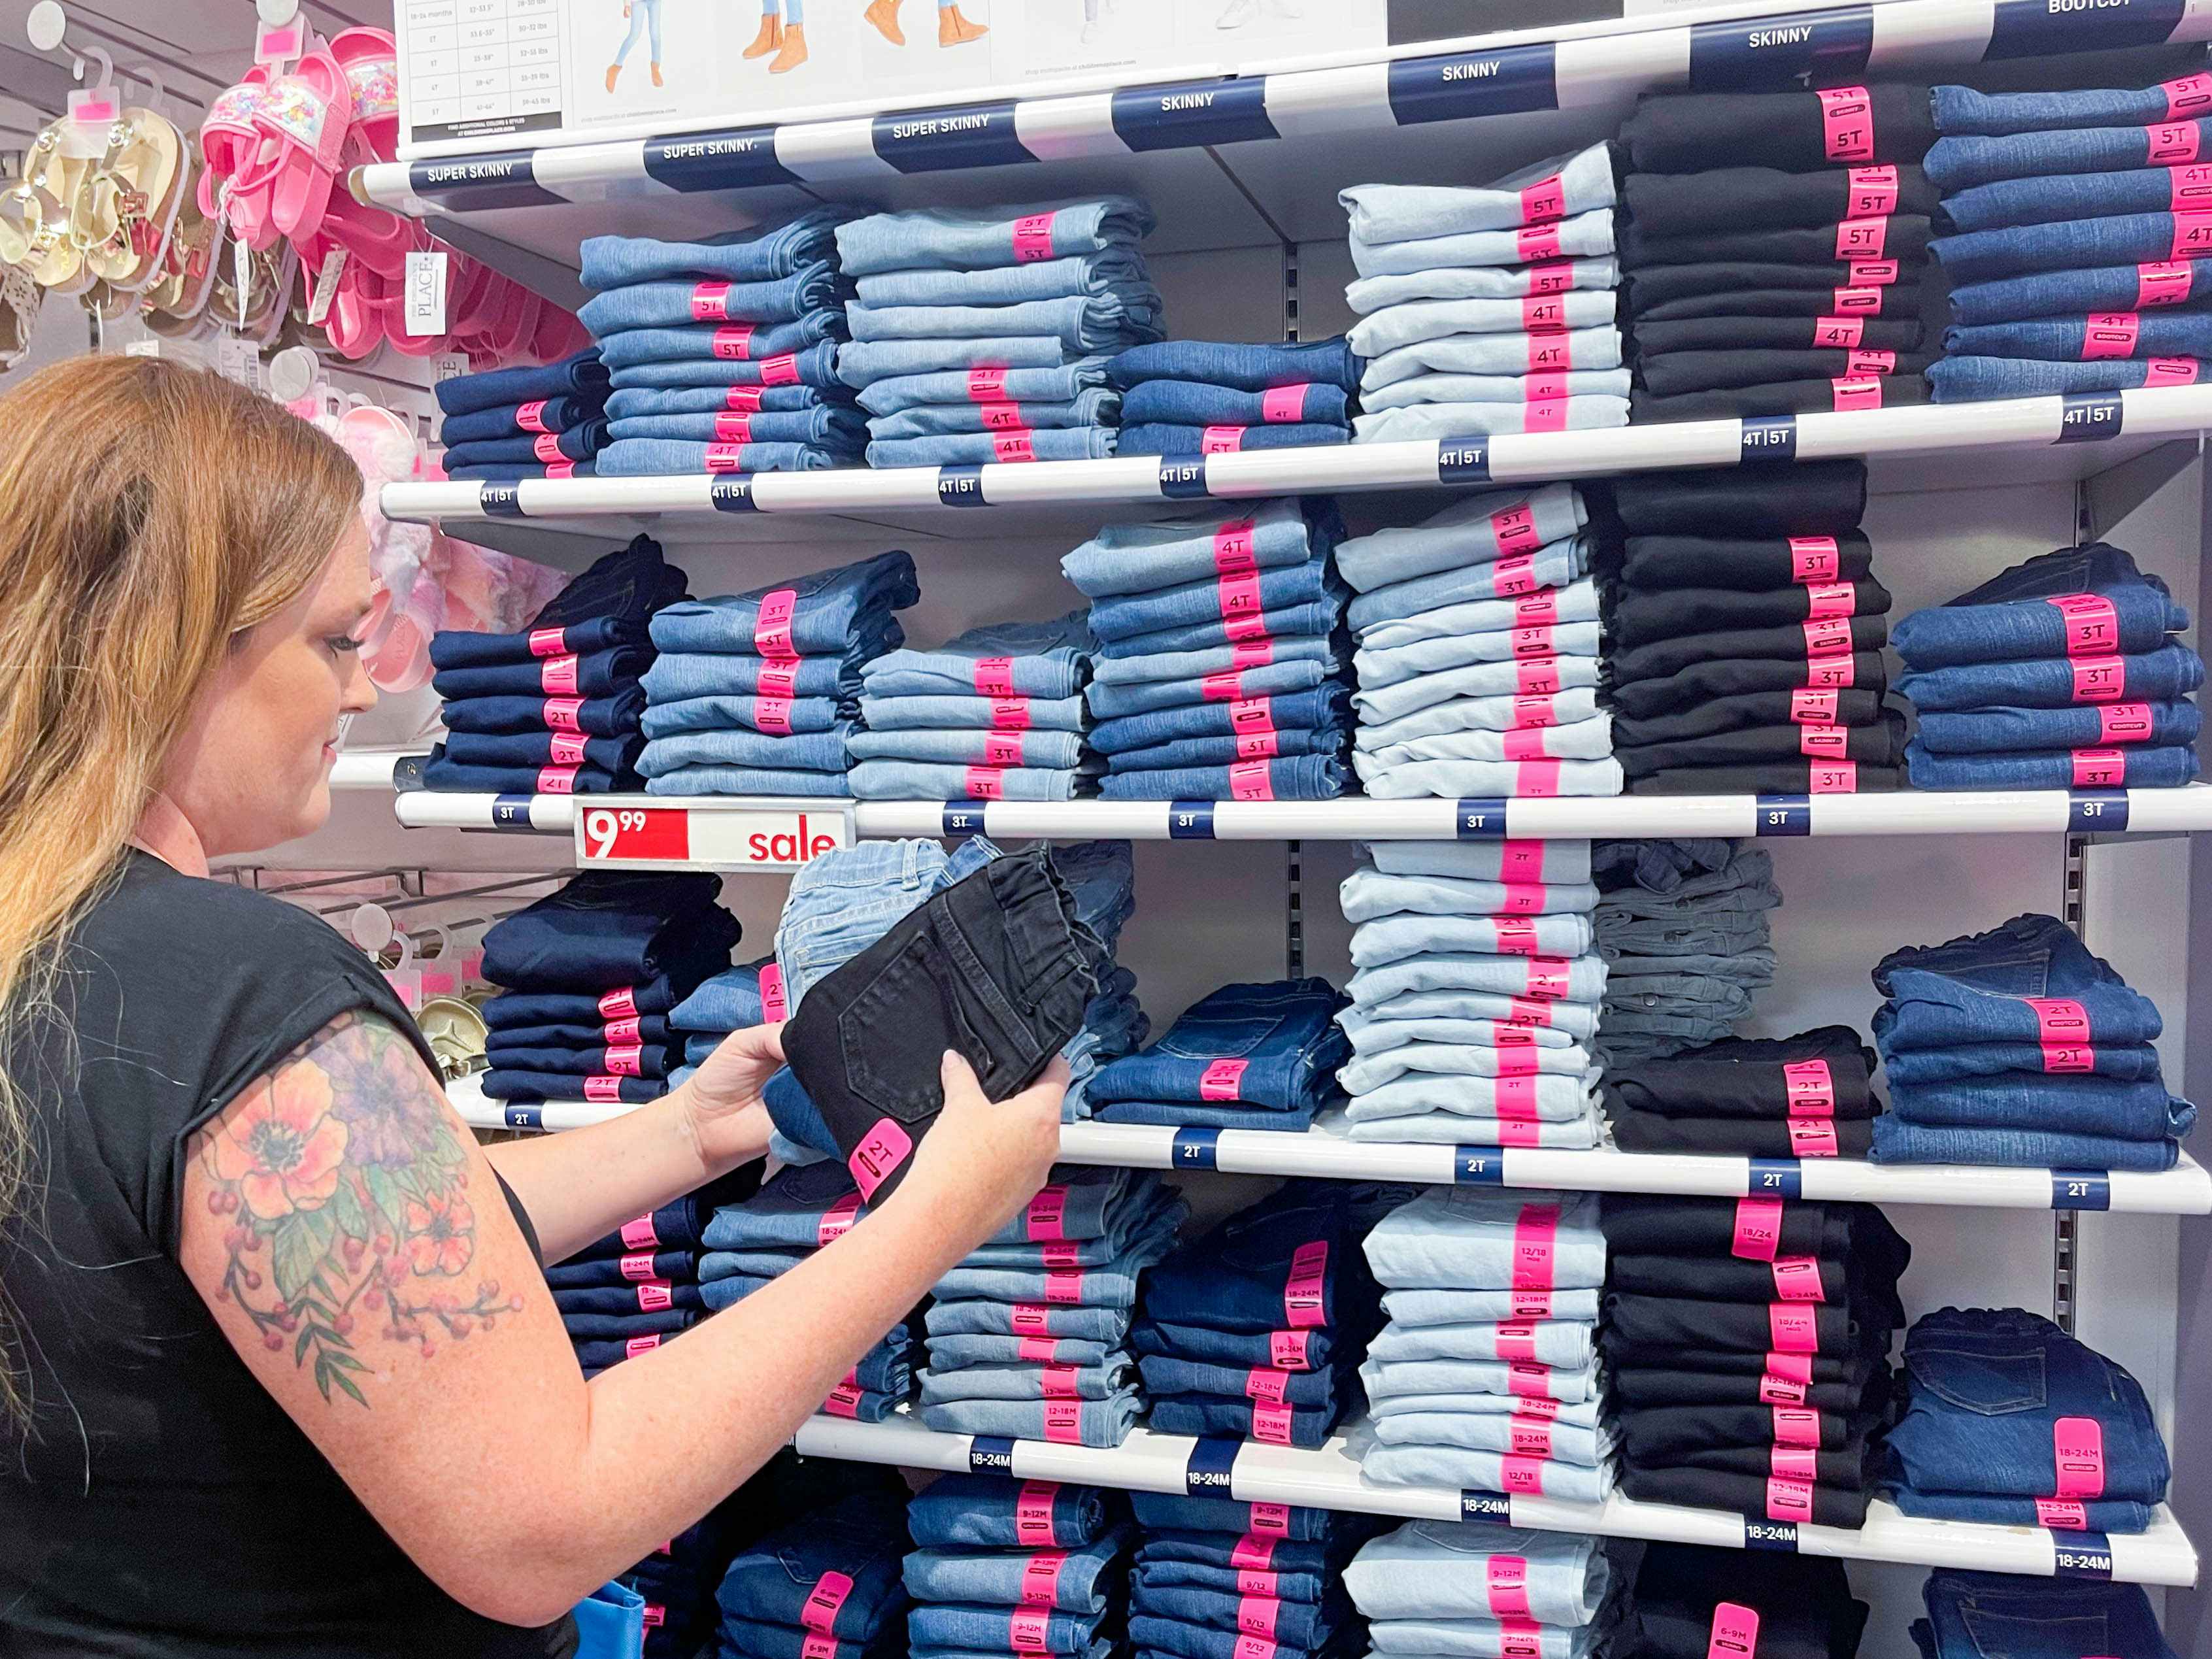 shelves on jeans in store